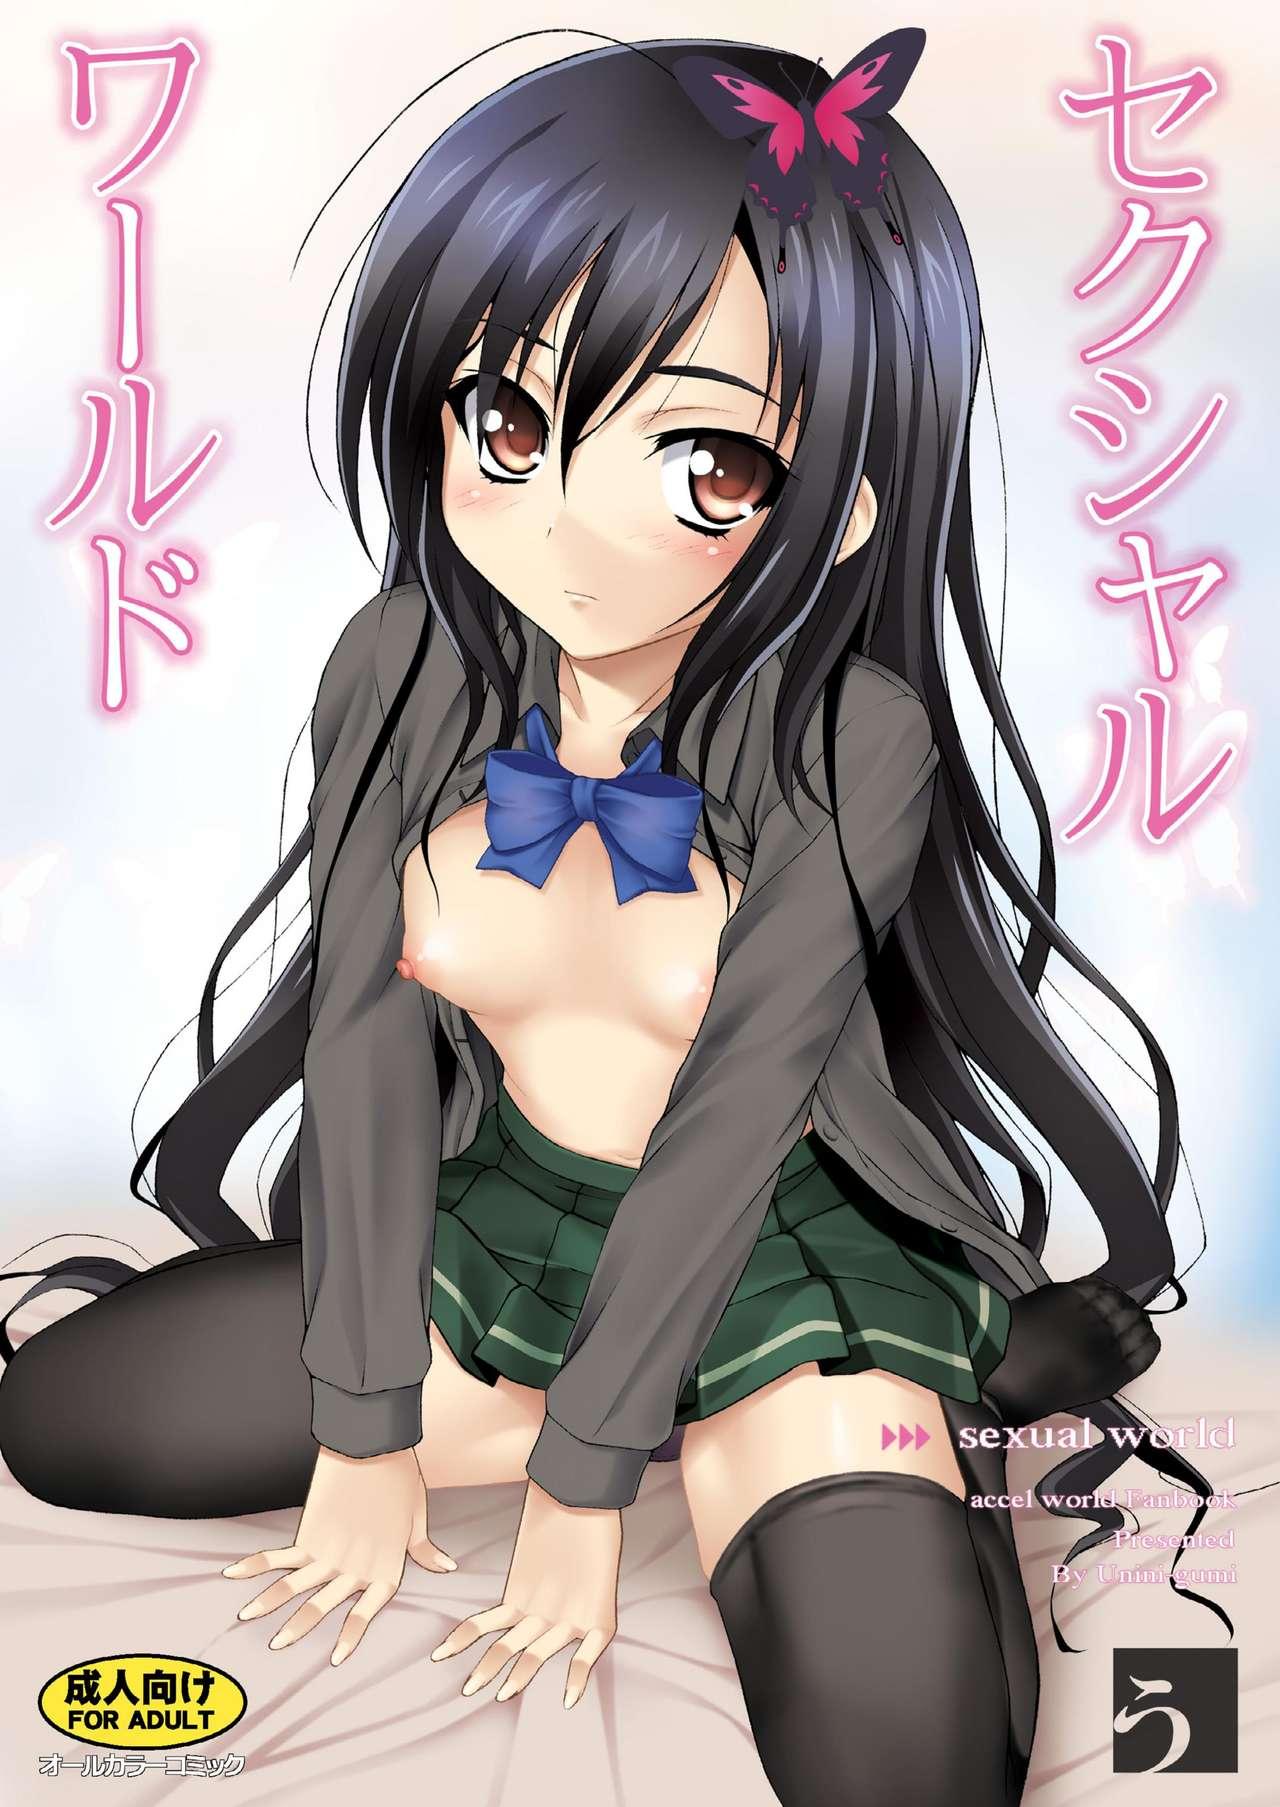 Peludo Sexual world - Accel world Teenage - Picture 1